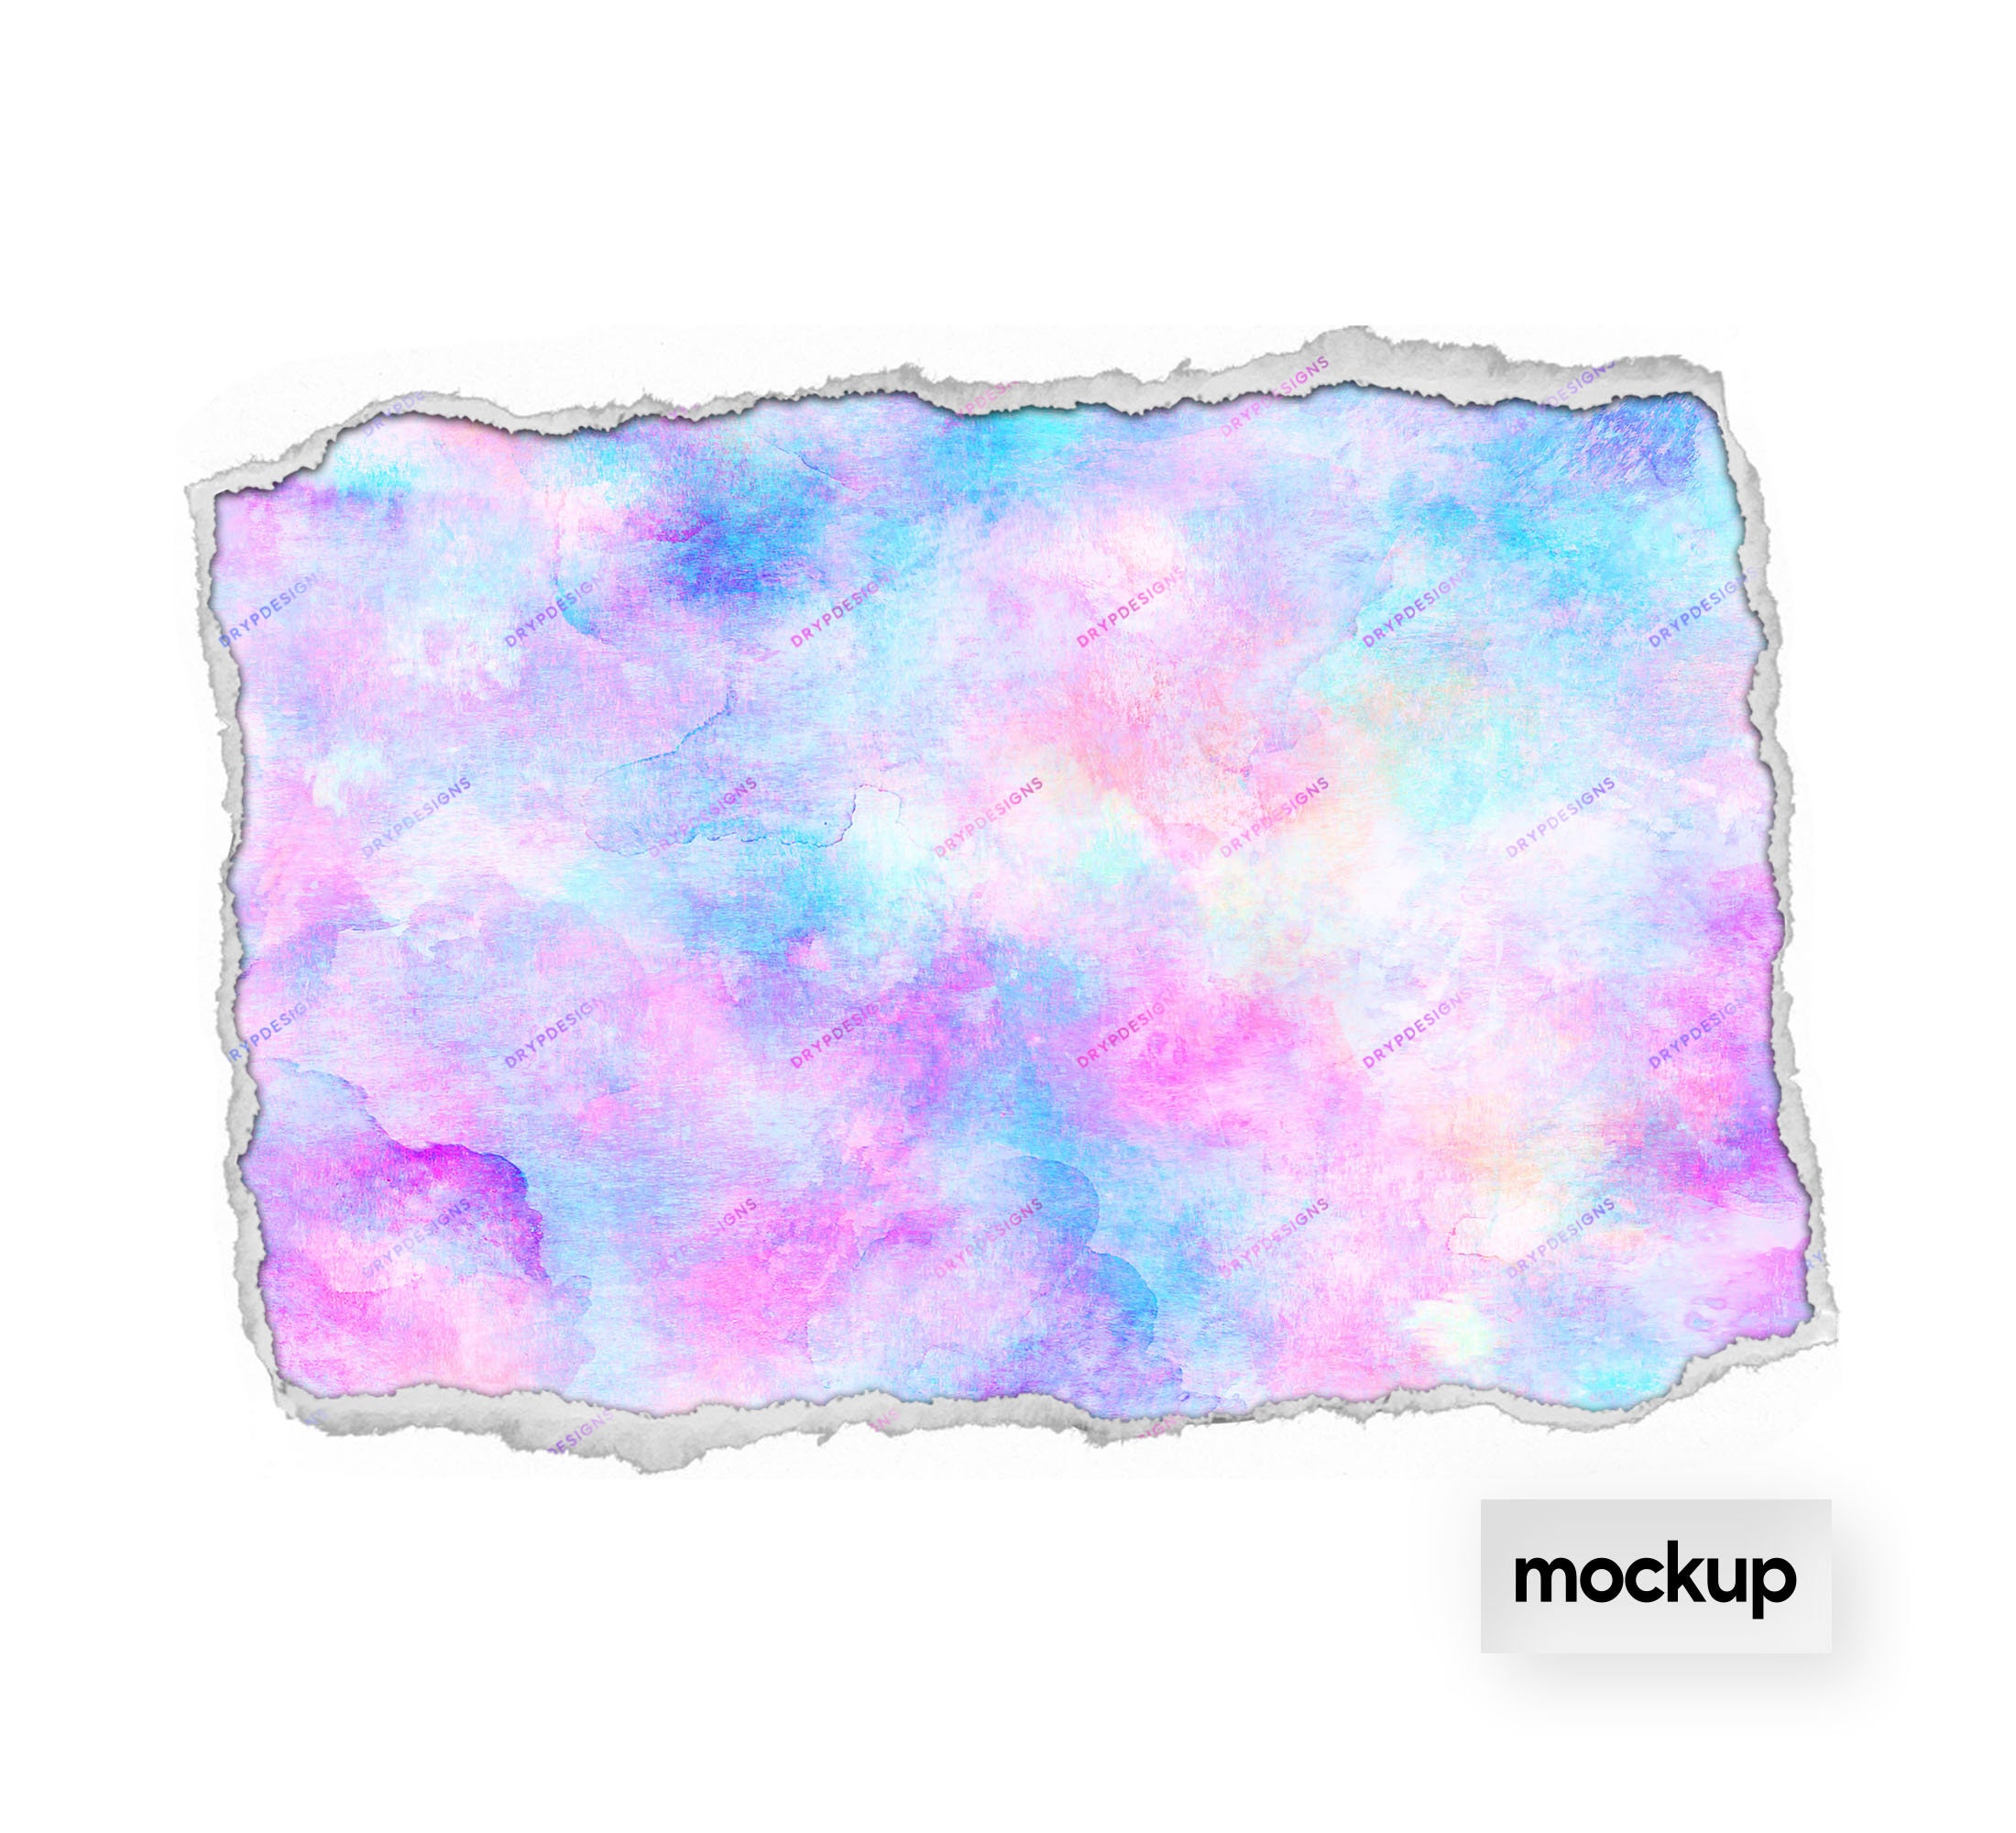 Watercolour Pastel Paint Splatter Tapestry for Sale by SaltySerenity